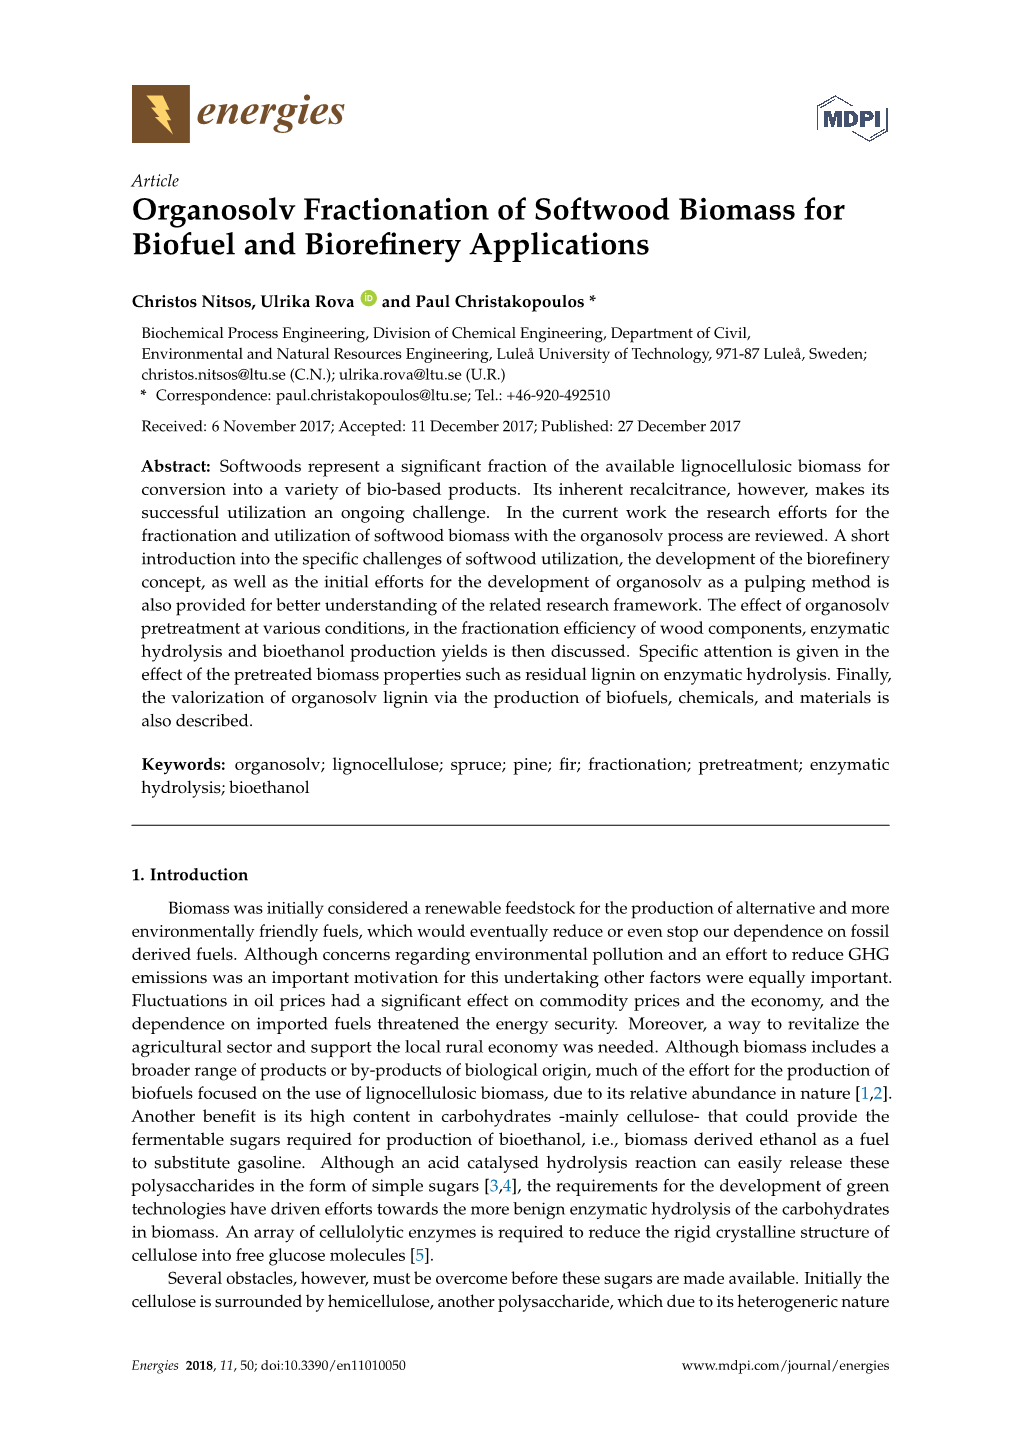 Organosolv Fractionation of Softwood Biomass for Biofuel and Biorefinery